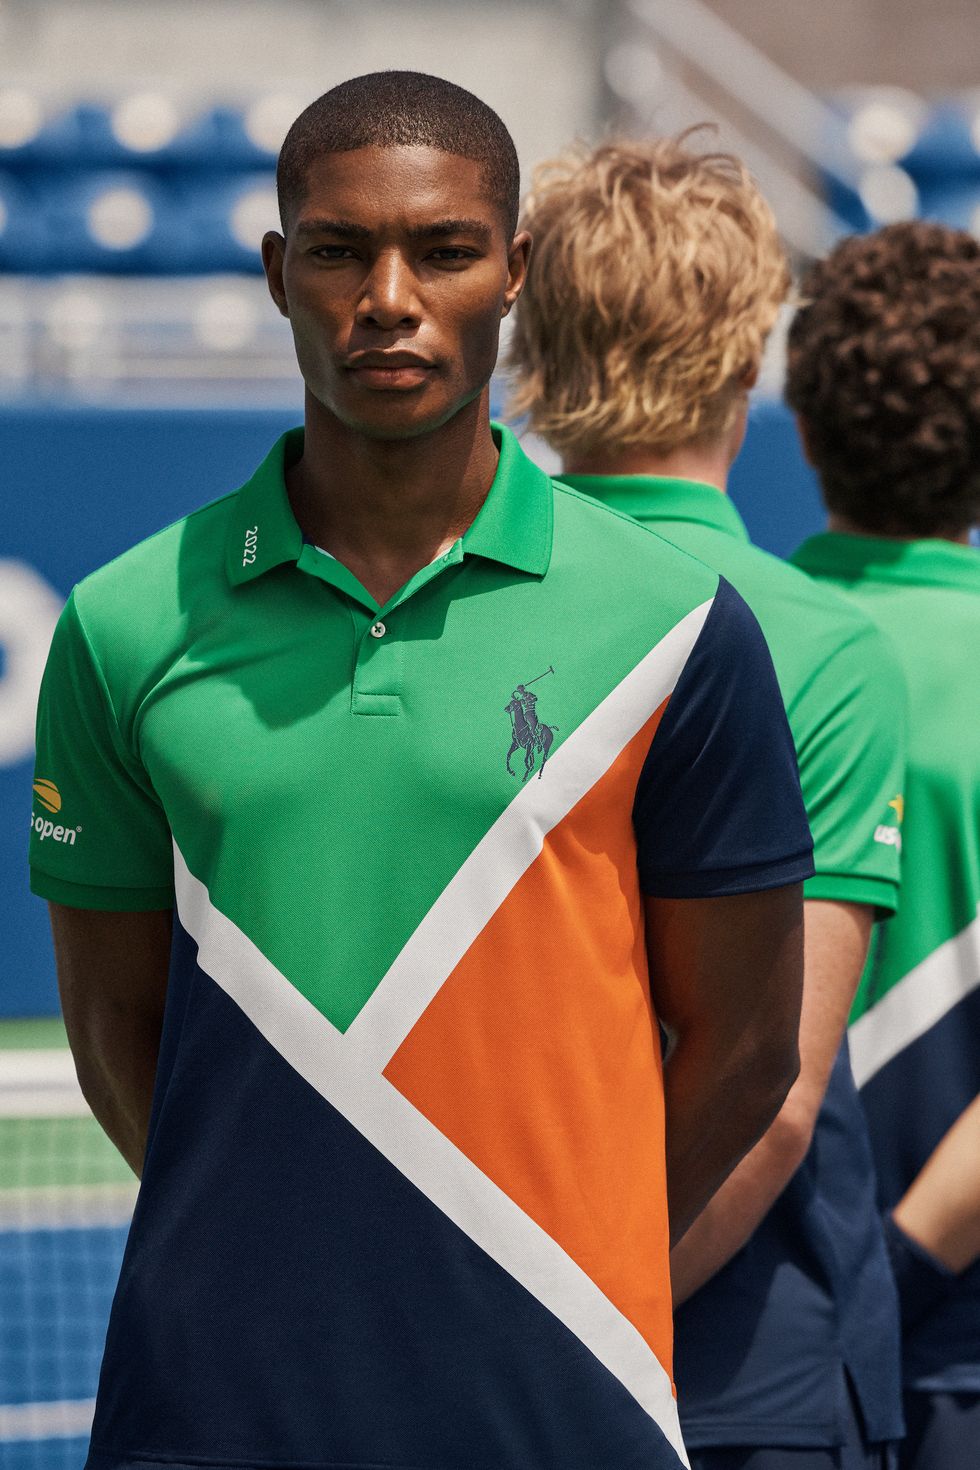 Polo Ralph Lauren celebrates reopening of N.Y. with '21 US Open campaign